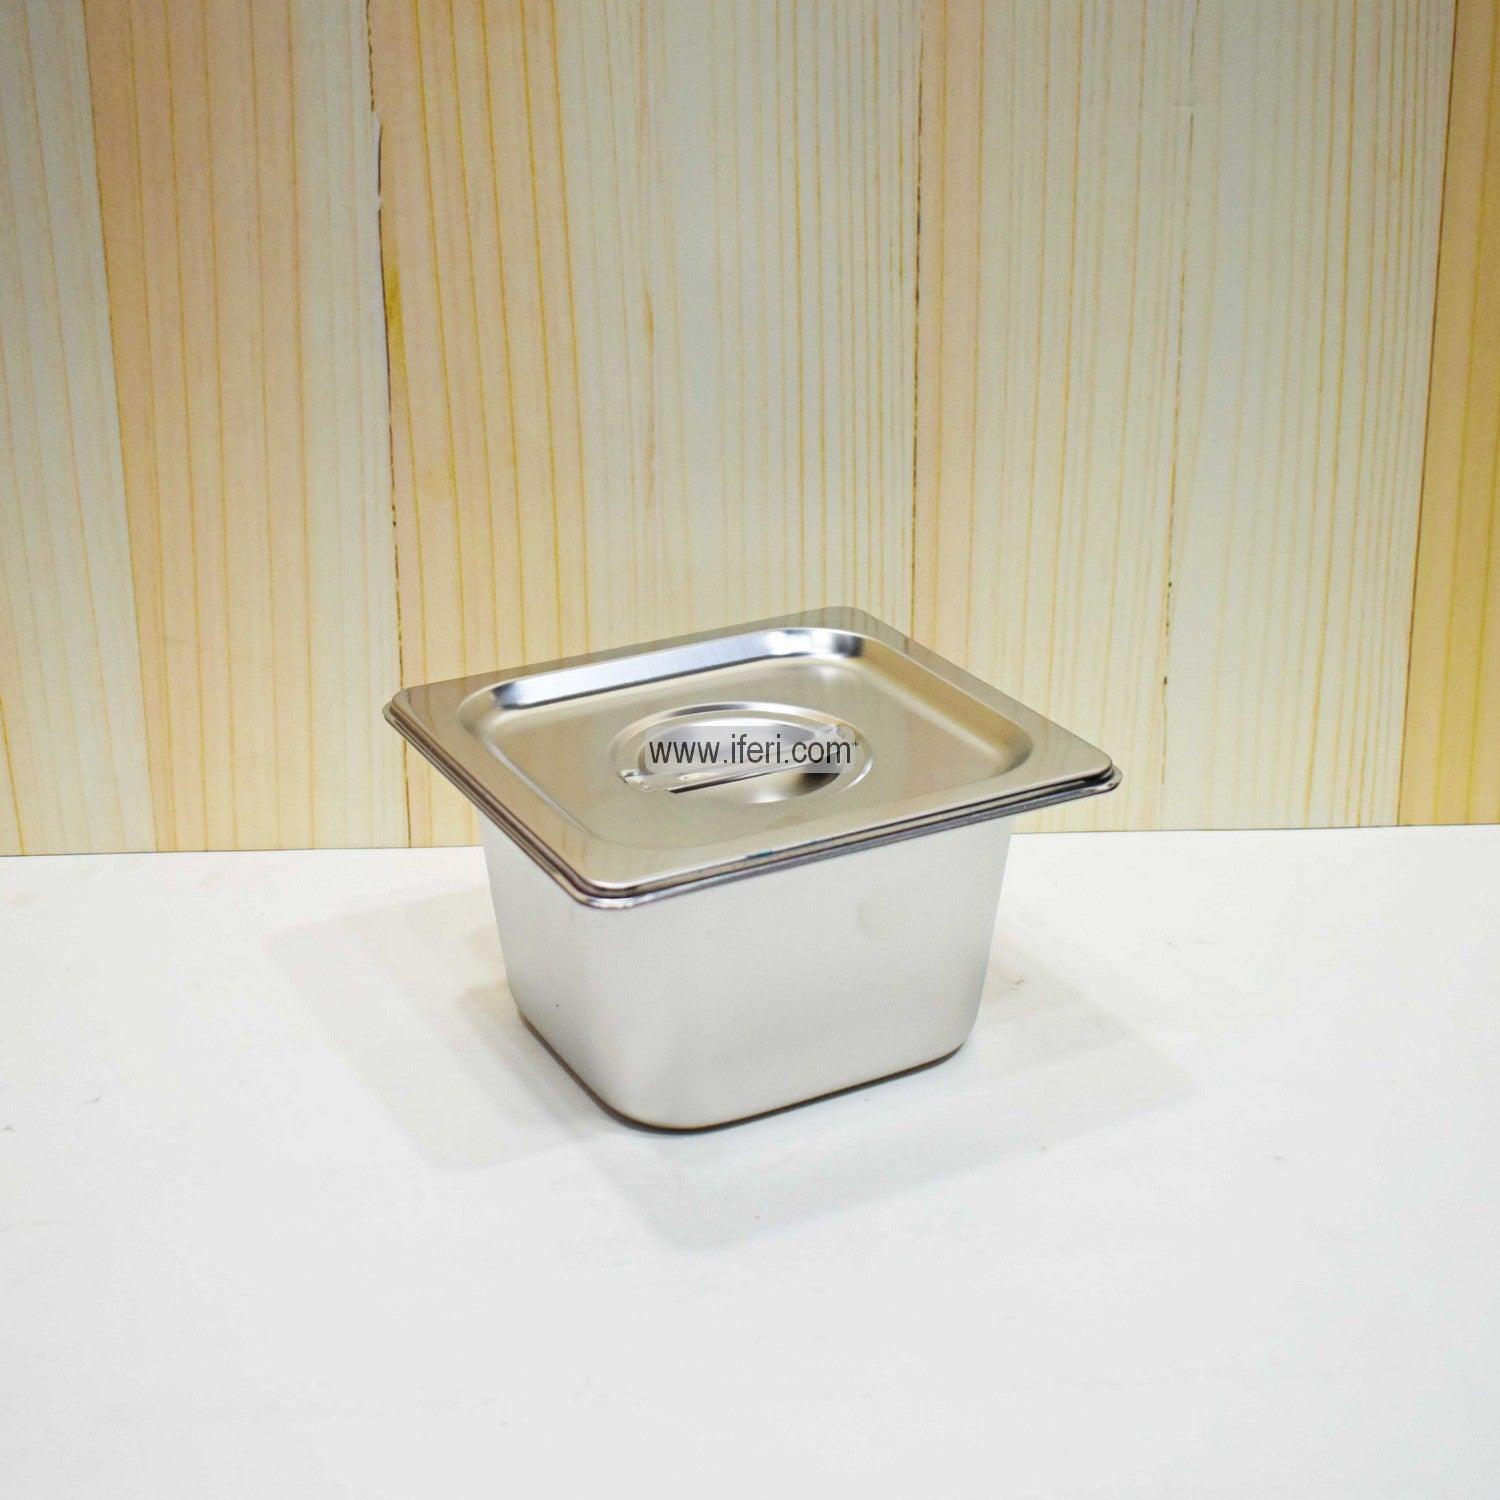 6.8 Inch Stainless Steel Food Pan with Lid SN0611 Price in Bangladesh - iferi.com